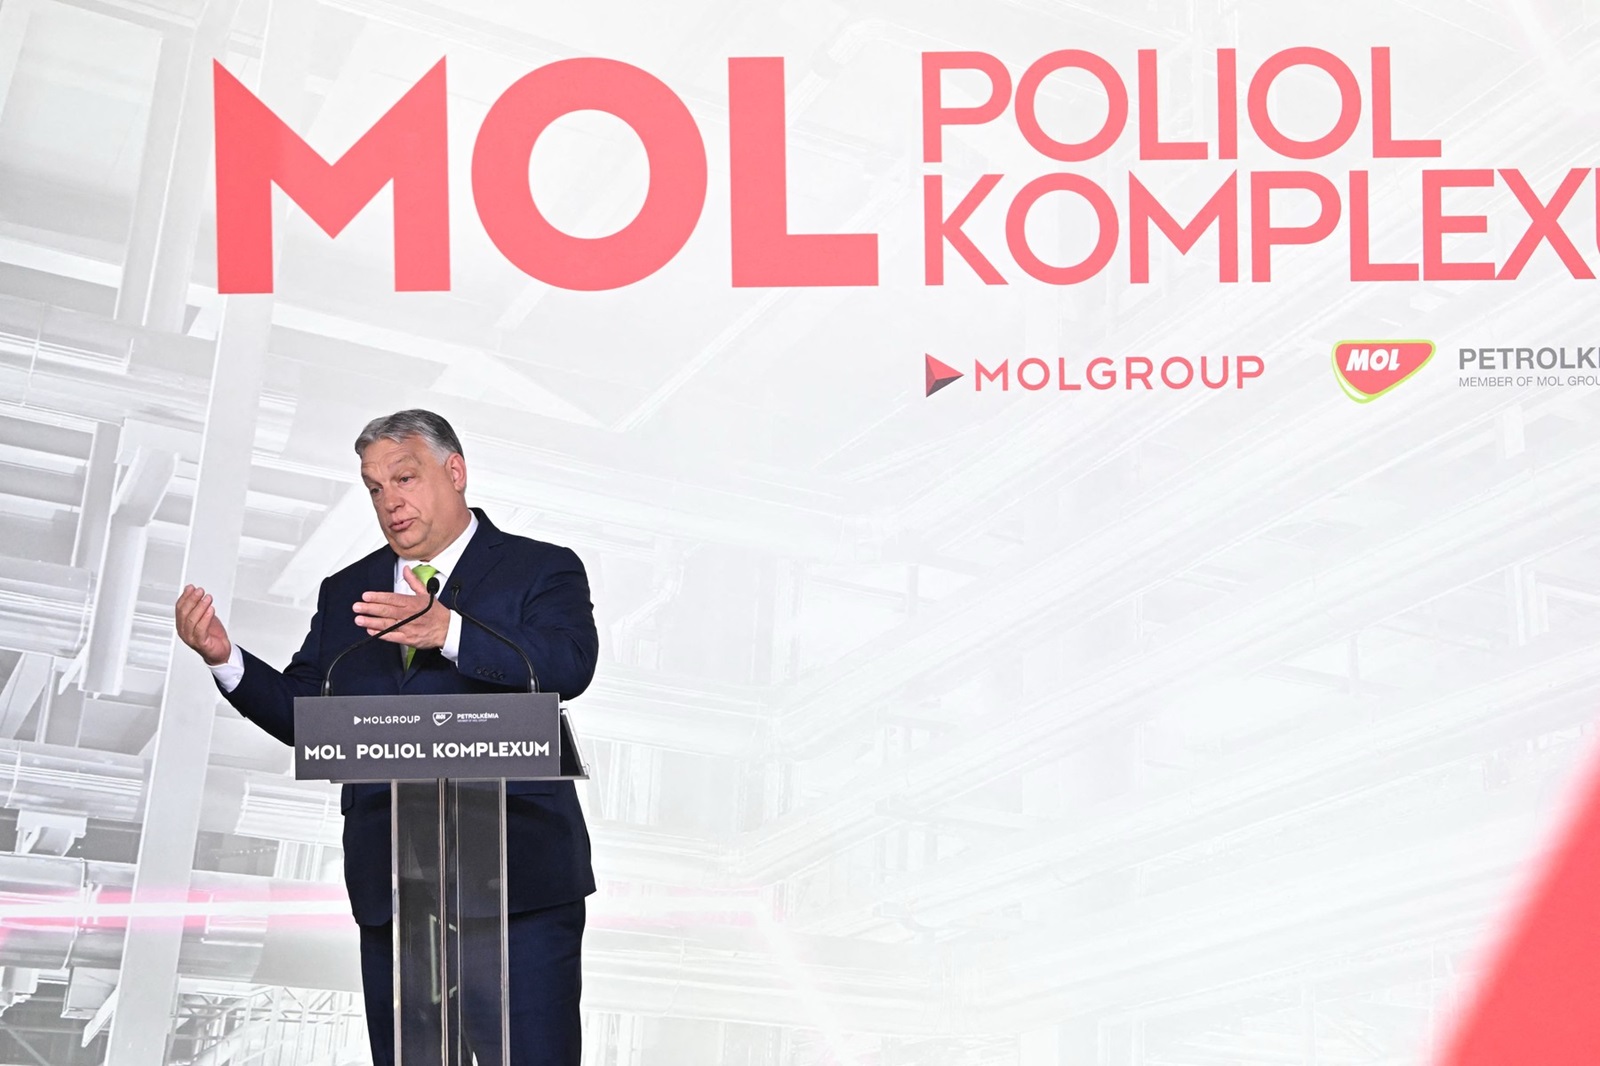 Hungarian Prime Minister Viktor Orban gives a speech to inaugurate Hungarian oil company Mol Group's new polyol complex near Tiszaujvaros, a town about 160 km from the Hungarian capital Budapest, on May 14, 2024. The petrochemical plant is set to produce around 200,000 tons of polyols per year. The Hungarian government subsidised the 1.3 billion development through tax allowance and investment grants.,Image: 872826383, License: Rights-managed, Restrictions: , Model Release: no, Credit line: Attila KISBENEDEK / AFP / Profimedia